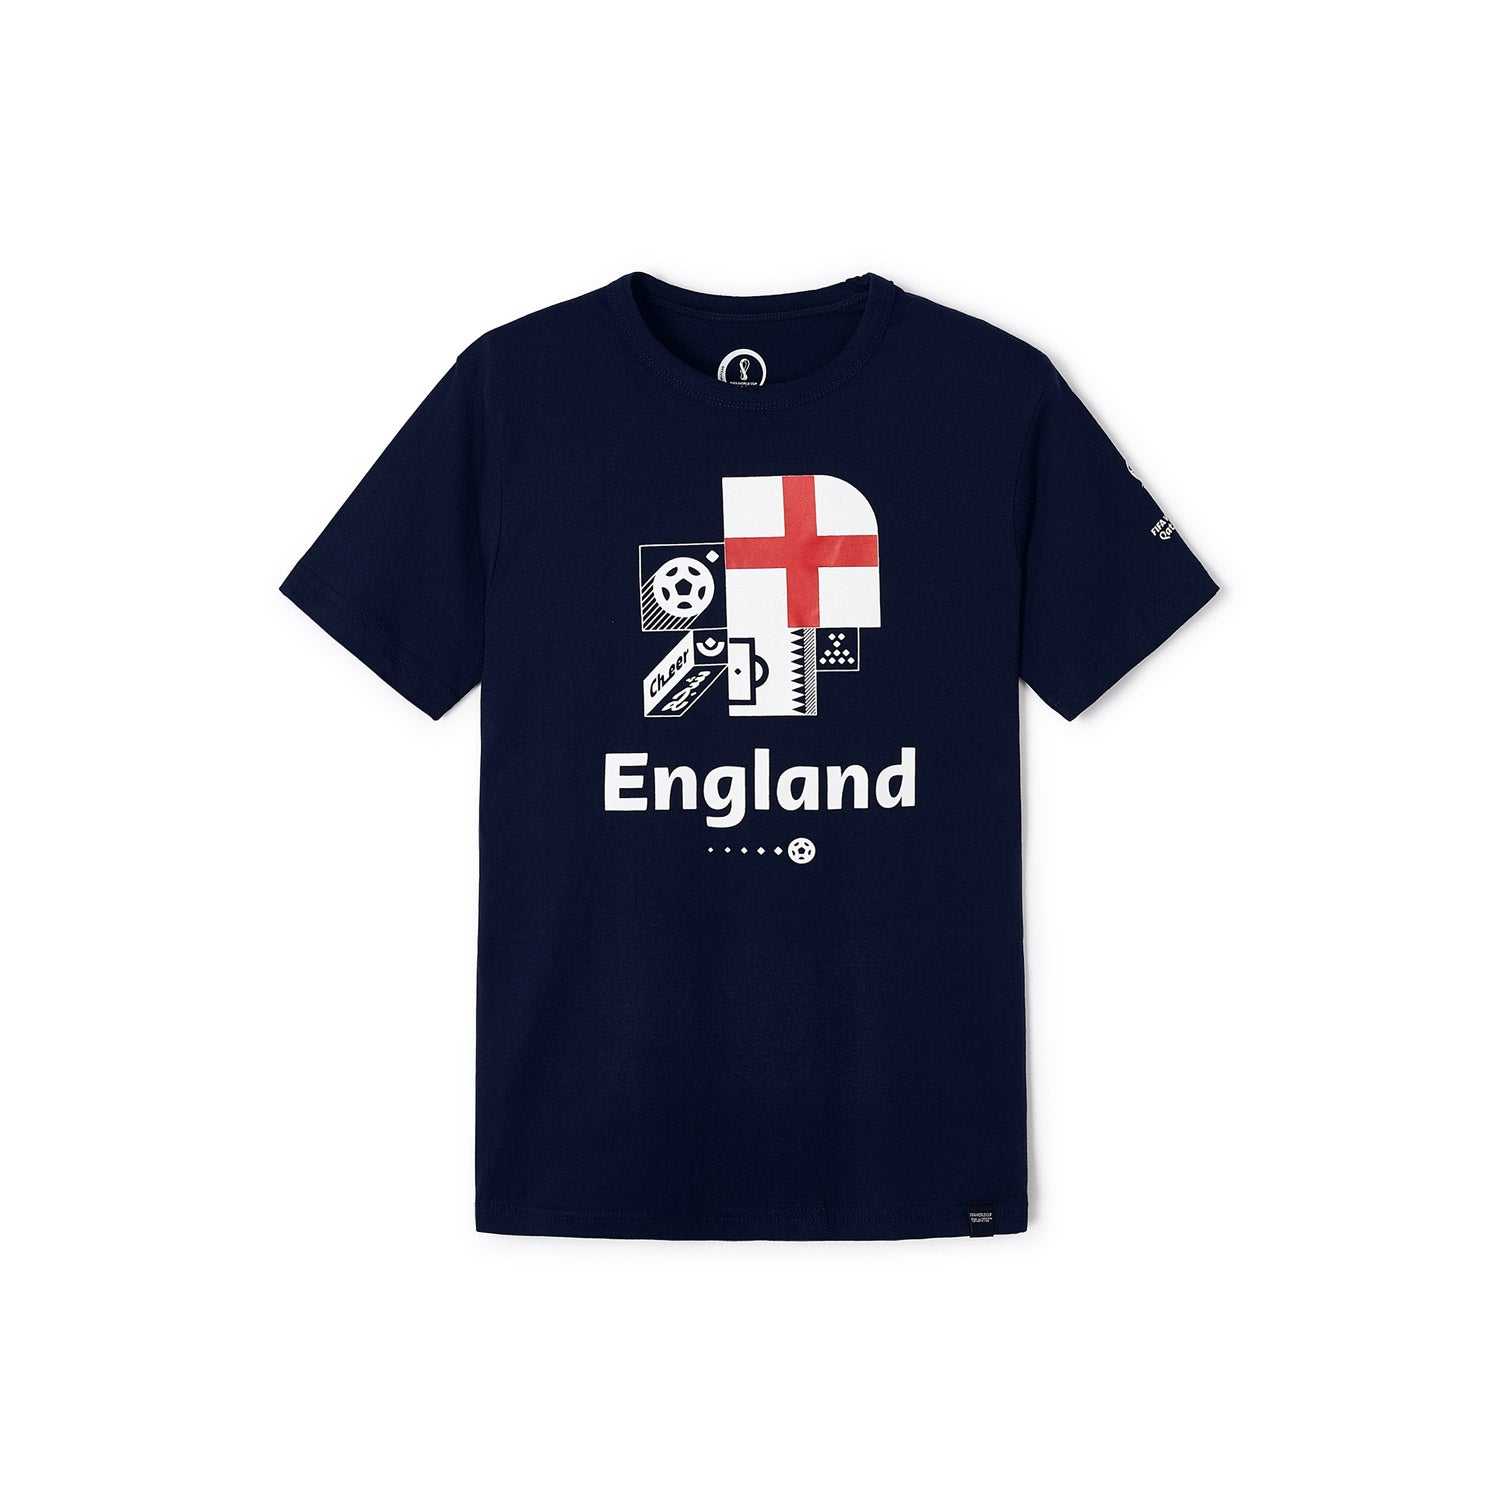 2022 World Cup England Graphic T-Shirt Blue  - Youth